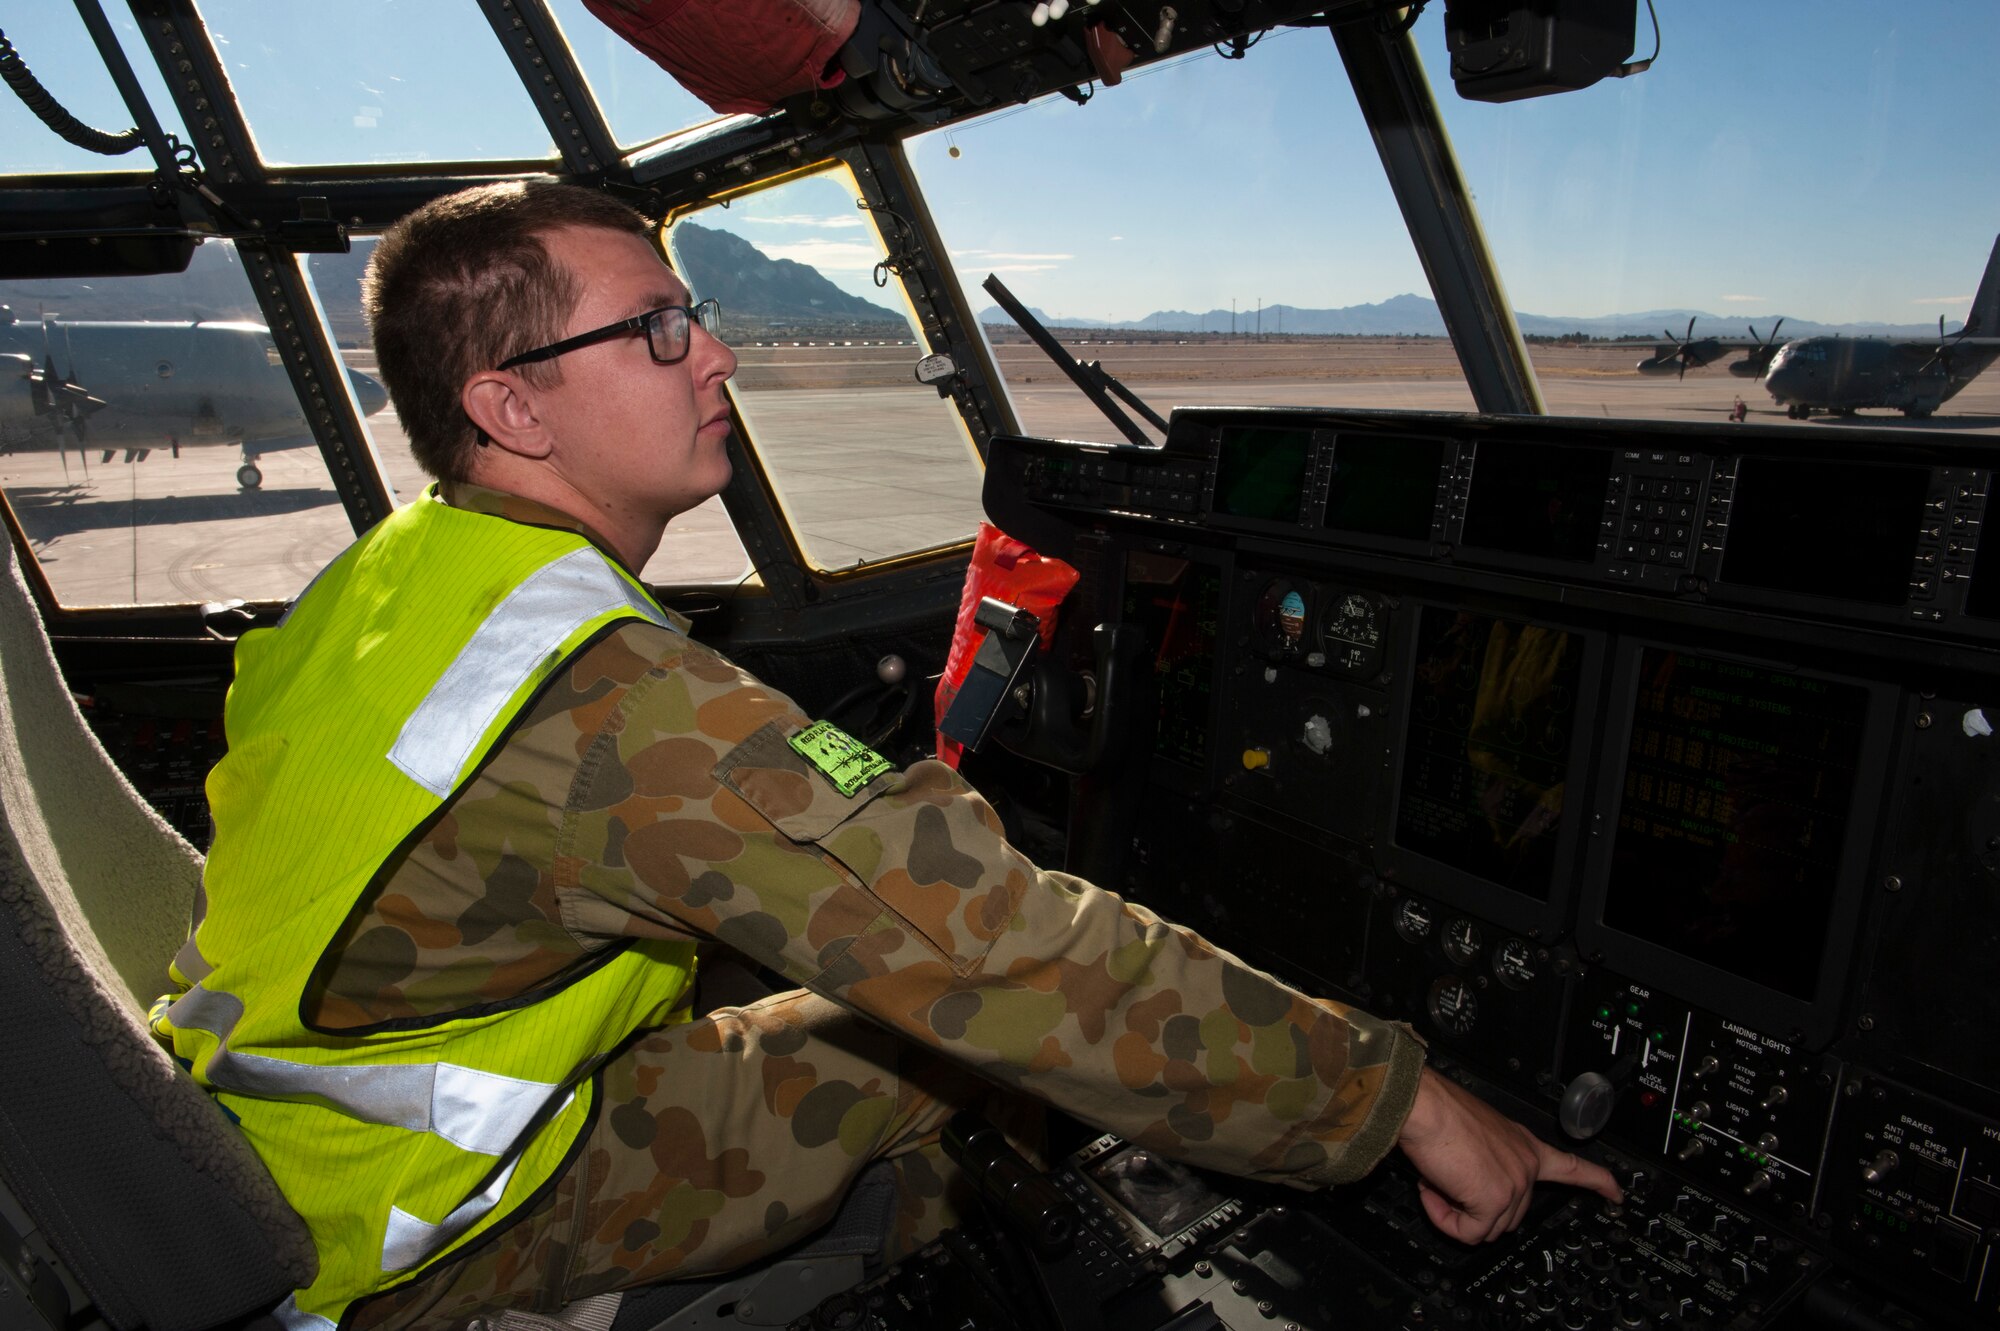 A Royal Australian air force aircraft maintainer prepares a C-130J Super Hercules from 37 Squadron, Richmond, Australia, for a training exercise during Red Flag 15-1 at Nellis Air Force Base, Nev., Feb. 7, 2015. In addition to increasing aircrew combat skills, Red Flag also increases ground crew combat readiness and effectiveness. (U.S. Air Force photo by Senior Airman Thomas Spangler)